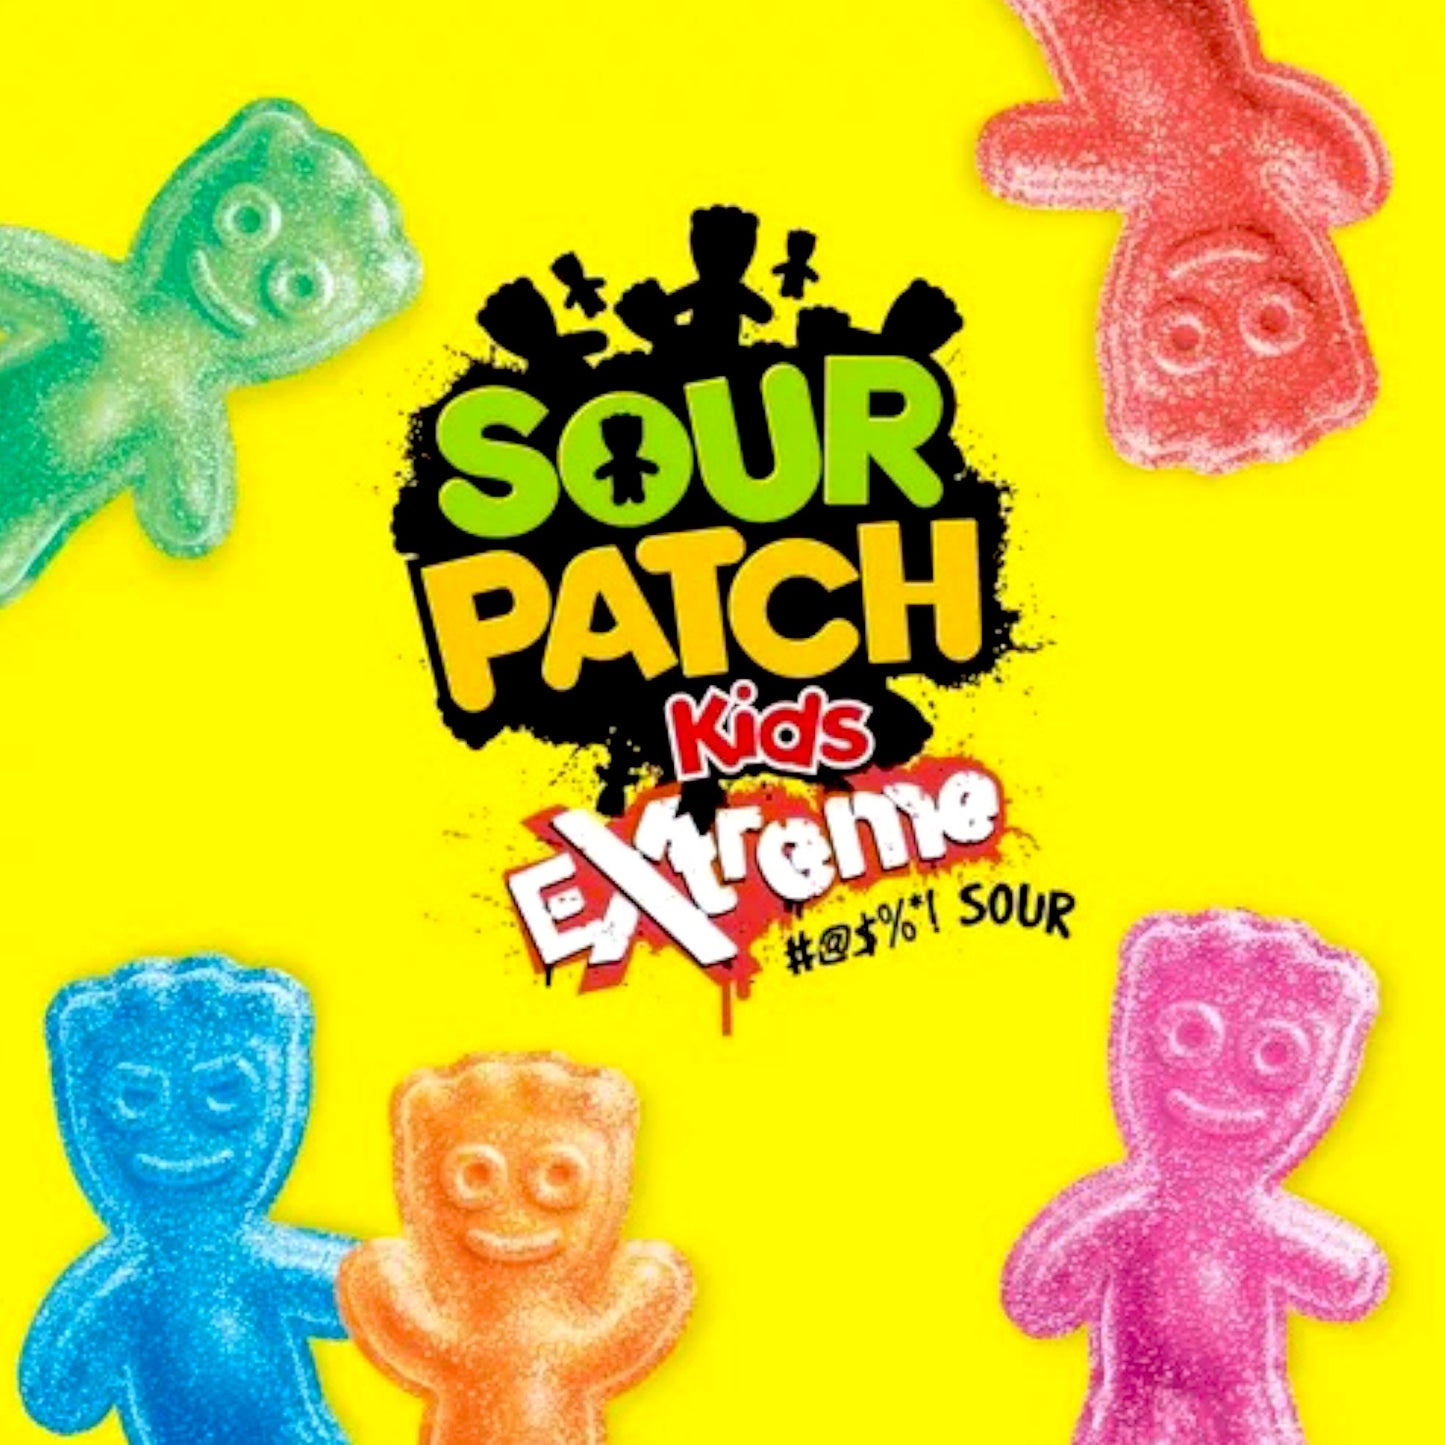 Gomitas Sour Patch EXTREME